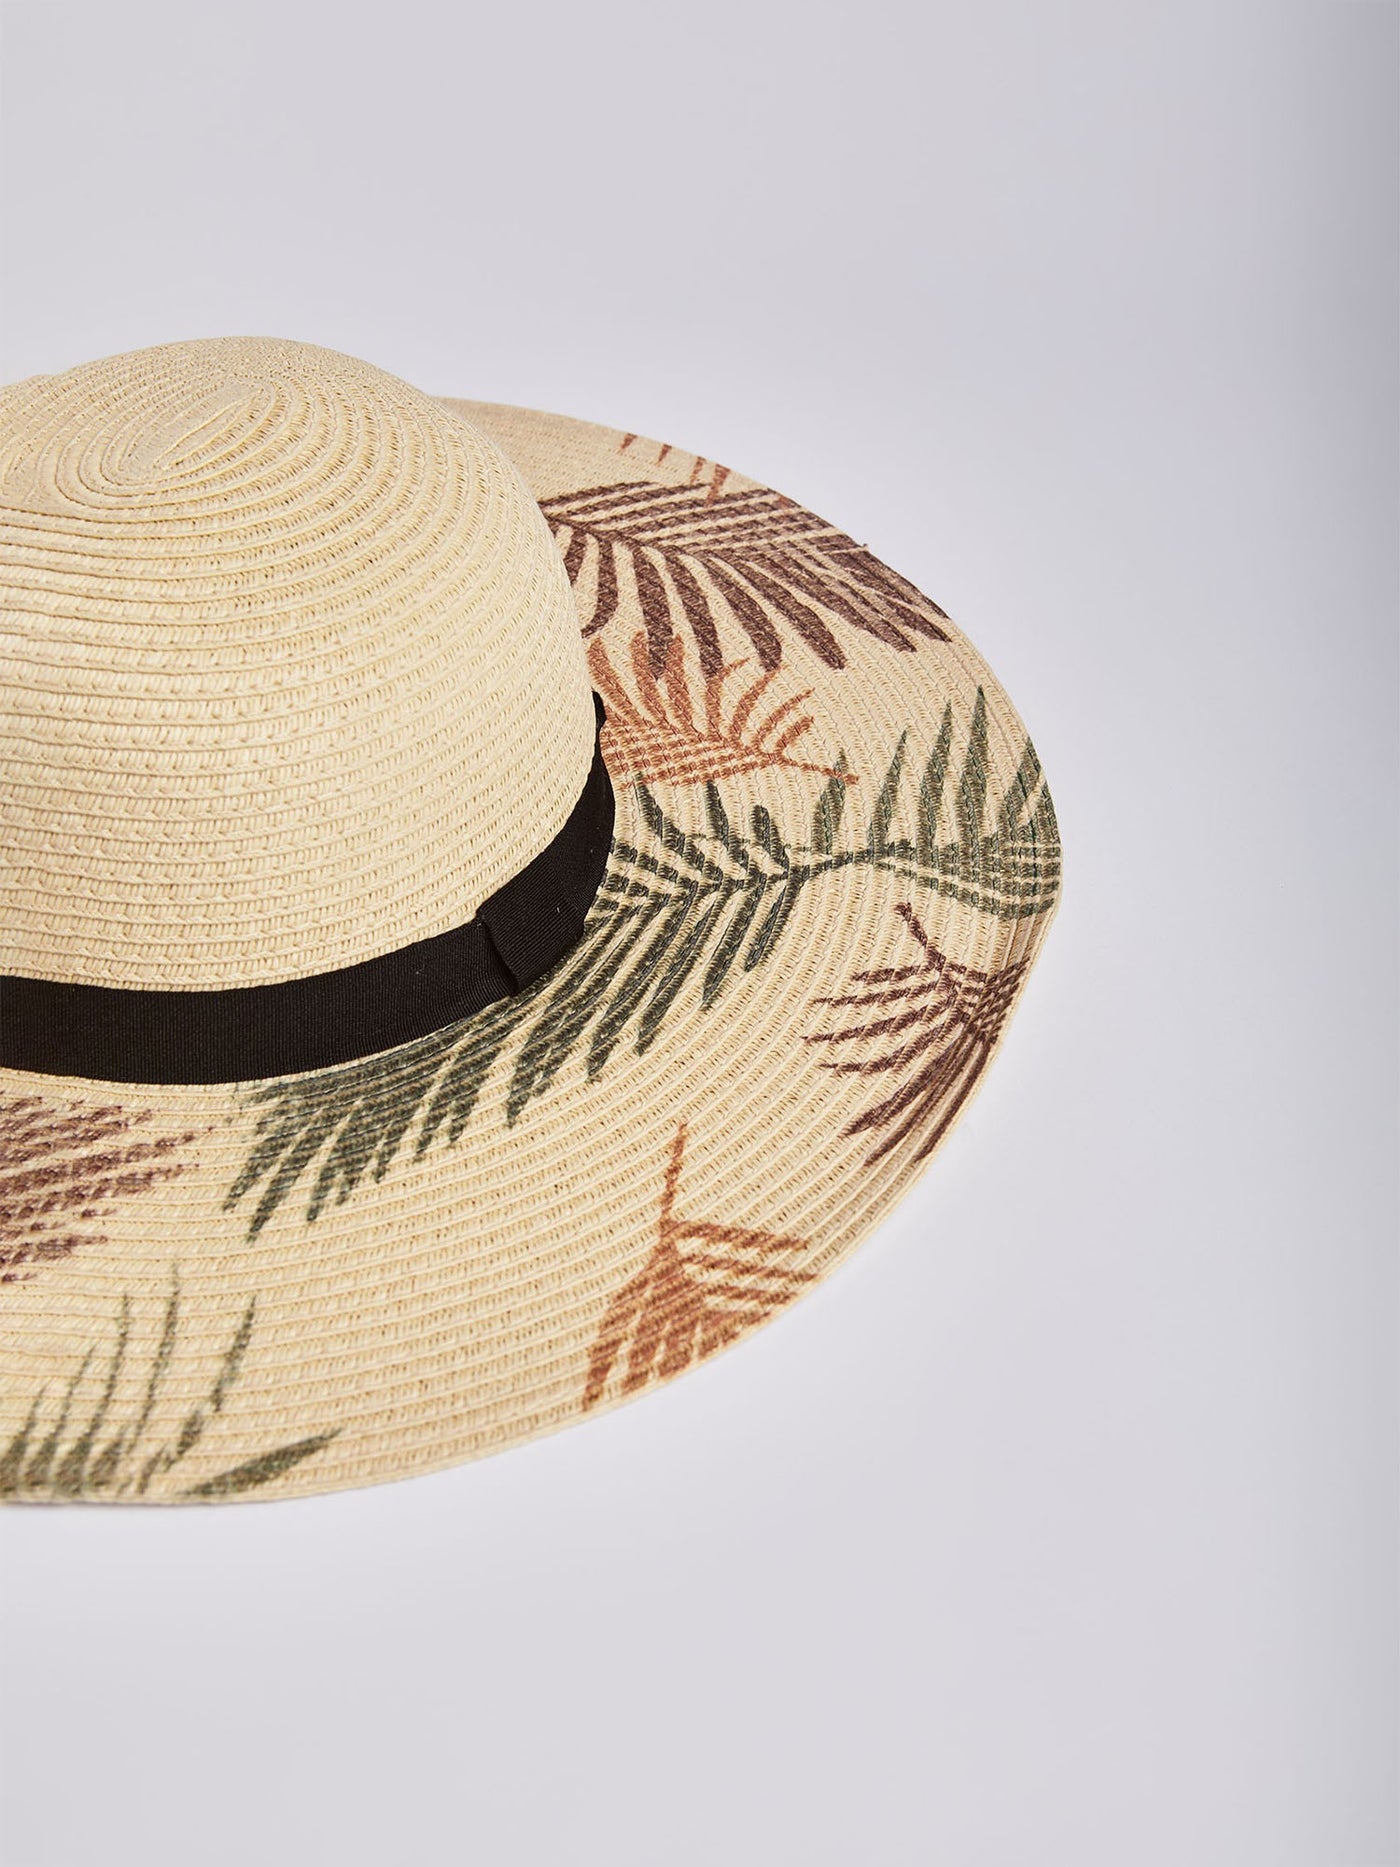 Rounded Hat - Straw